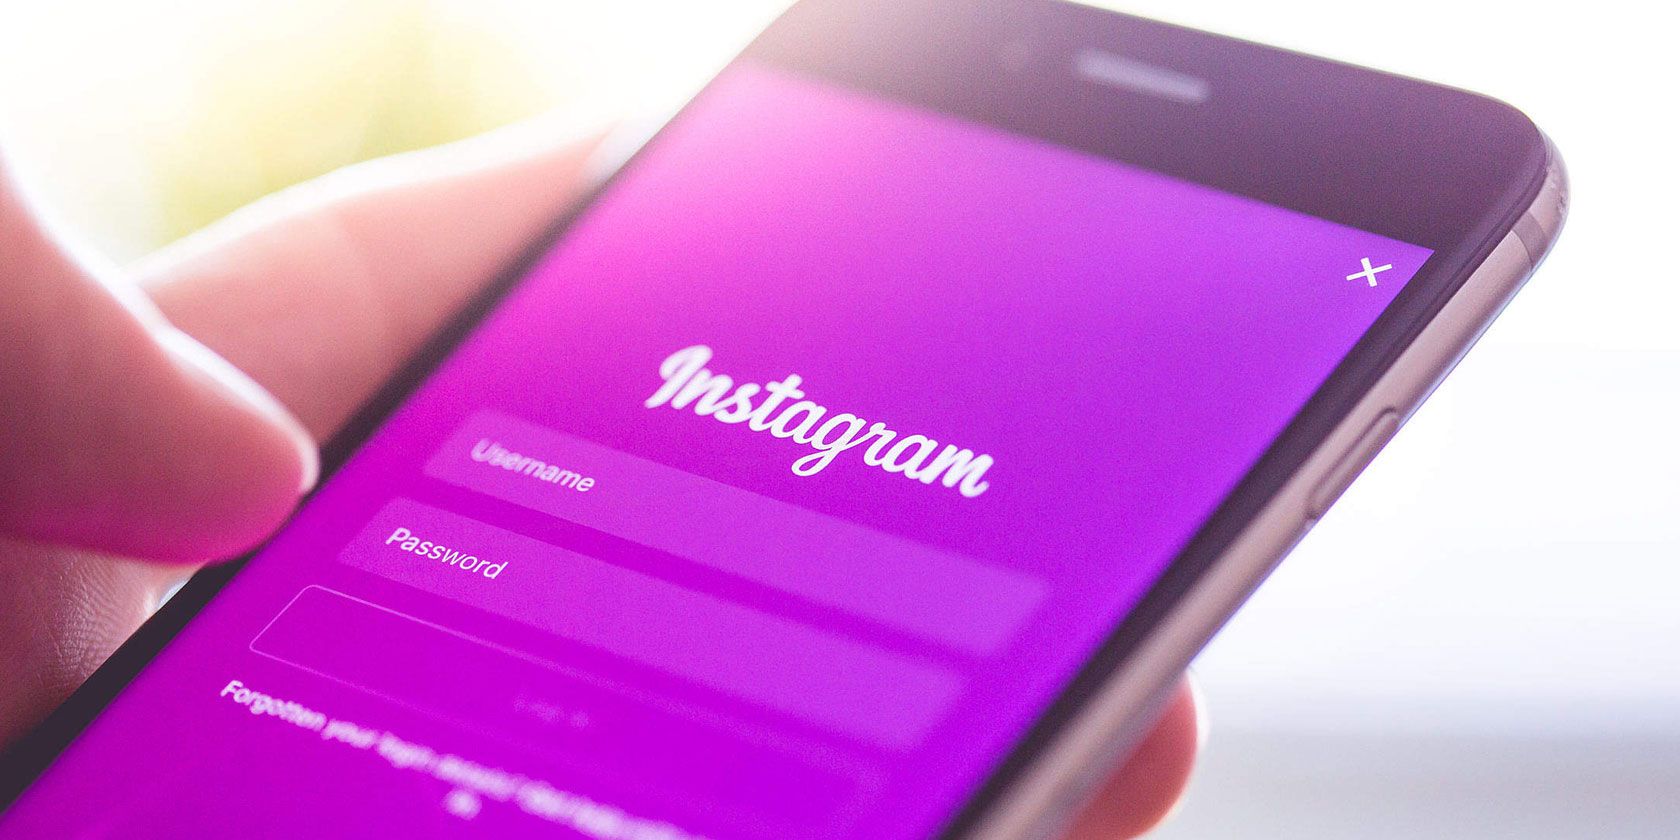 How to Find Out Who Has Viewed Your Instagram Posts